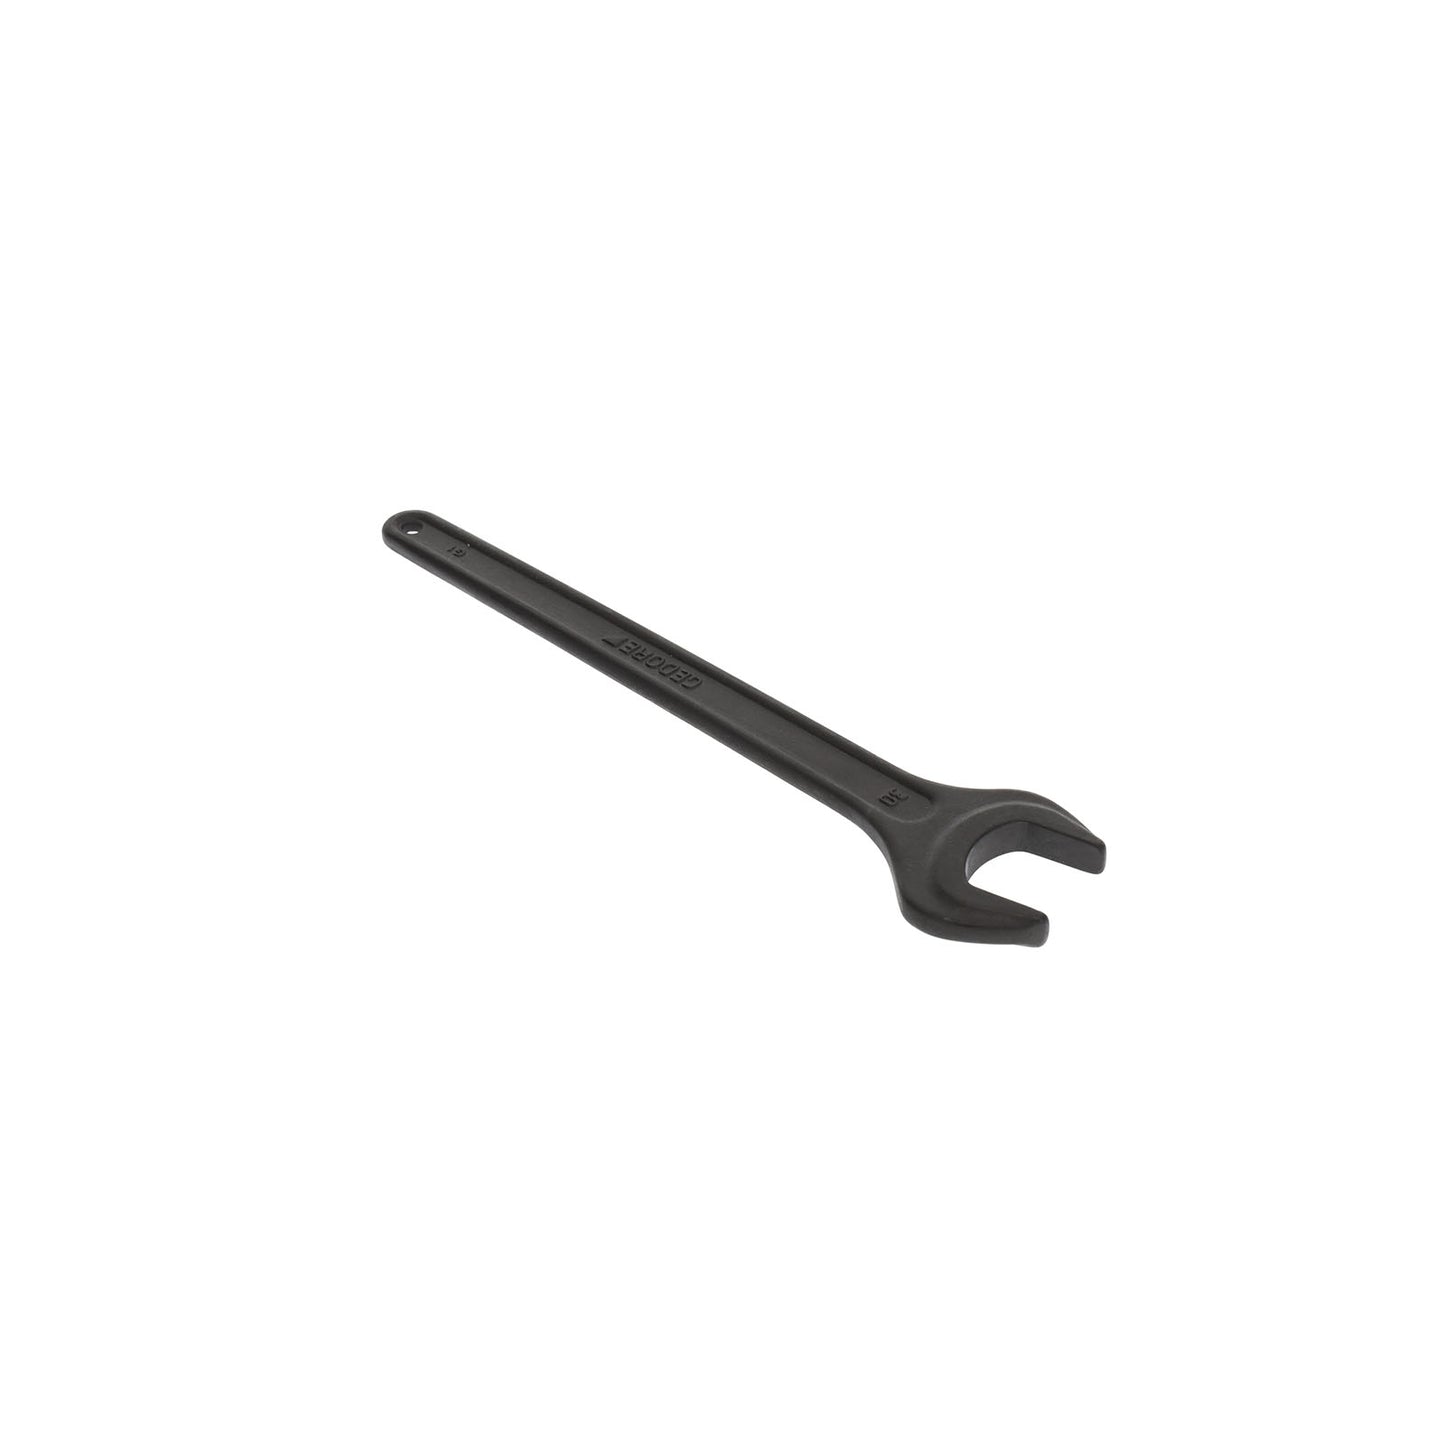 GEDORE 894 30 - 1 Open End Wrench, 30mm (6576380)